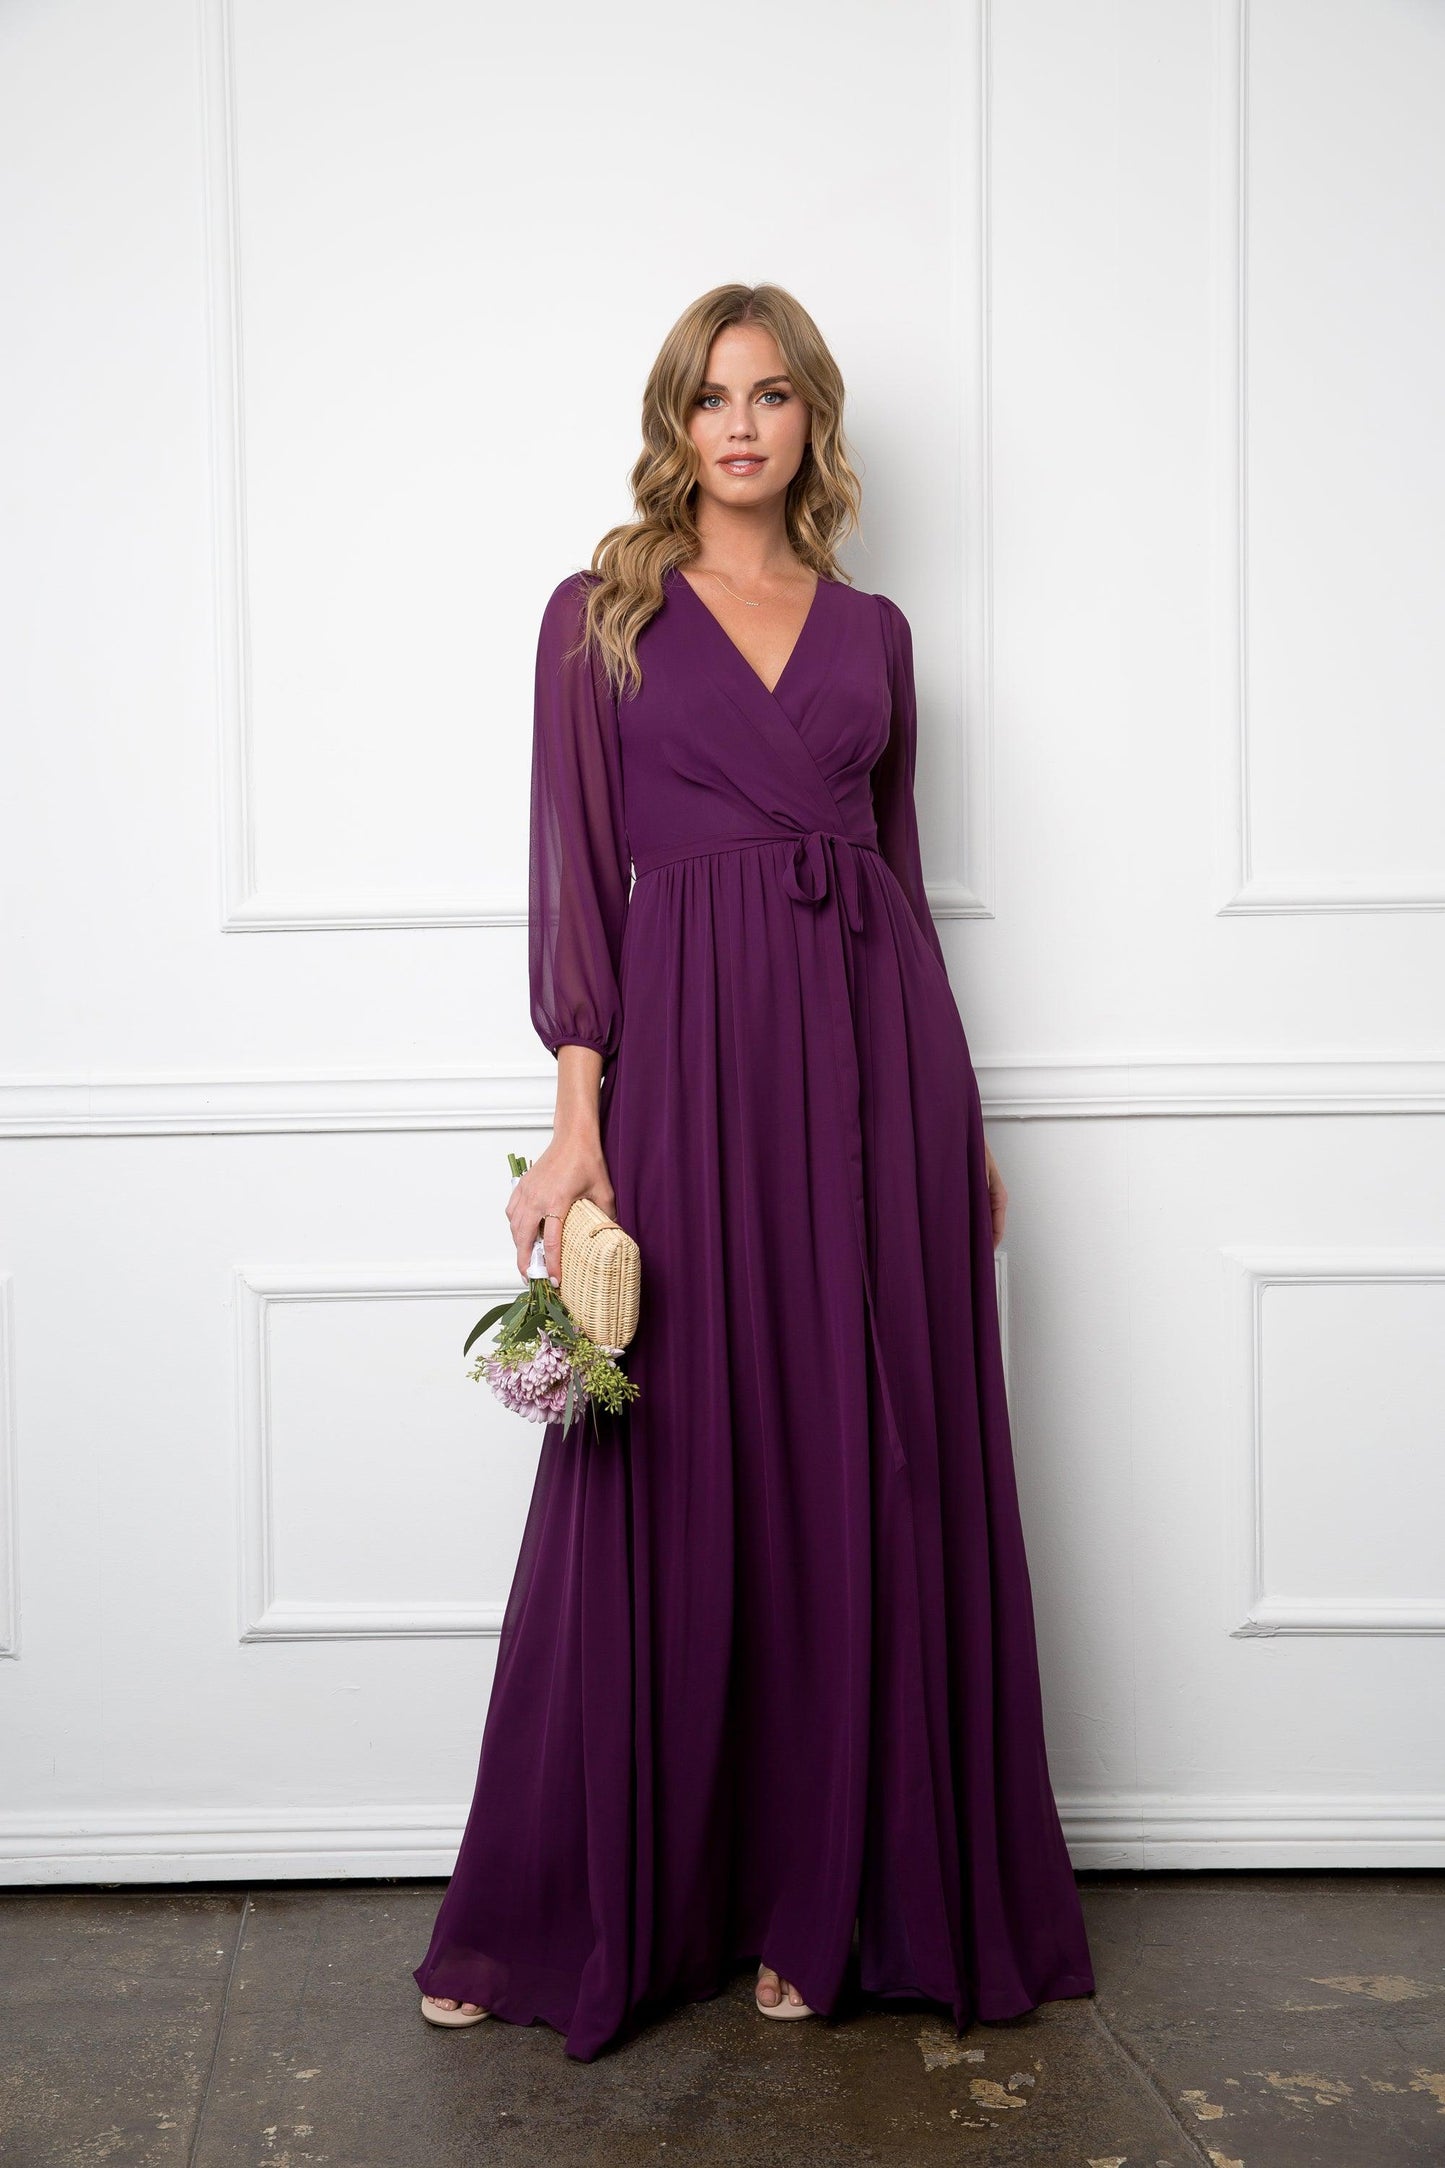 Long Sleeve Mother of the Bride Chiffon Dress